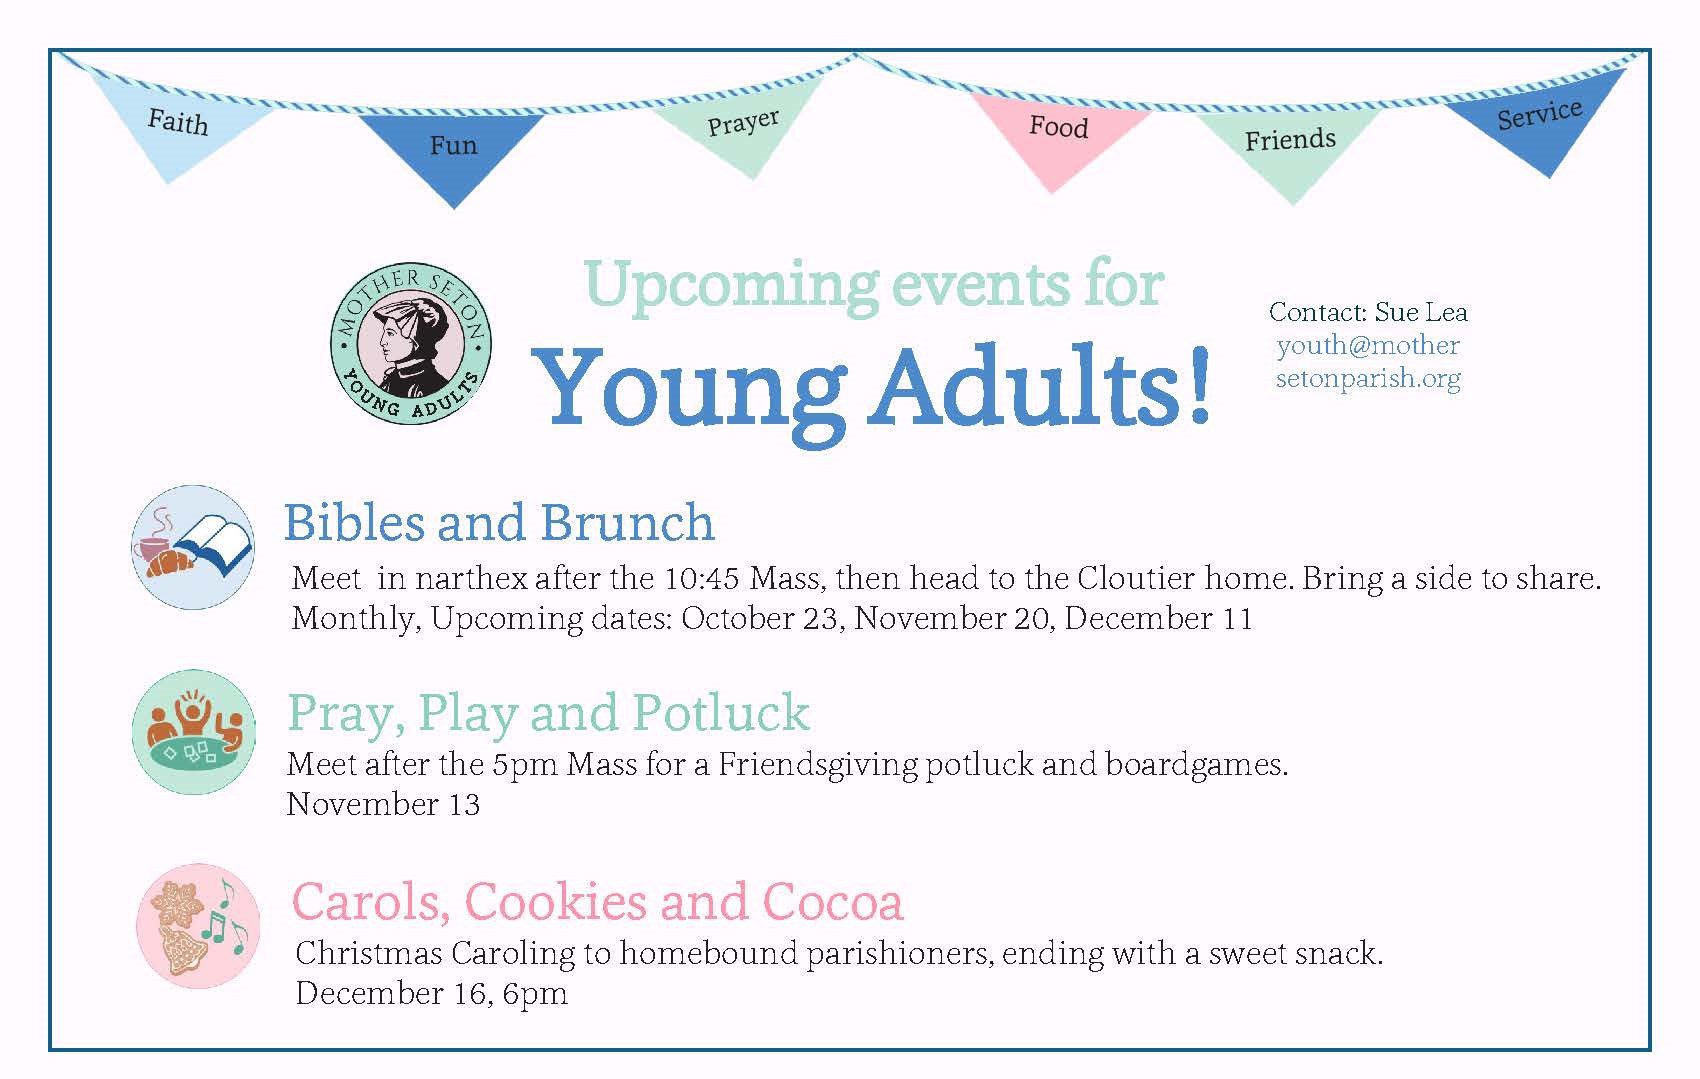 UPCOMING EVENTS FOR YOUNG ADULTS!